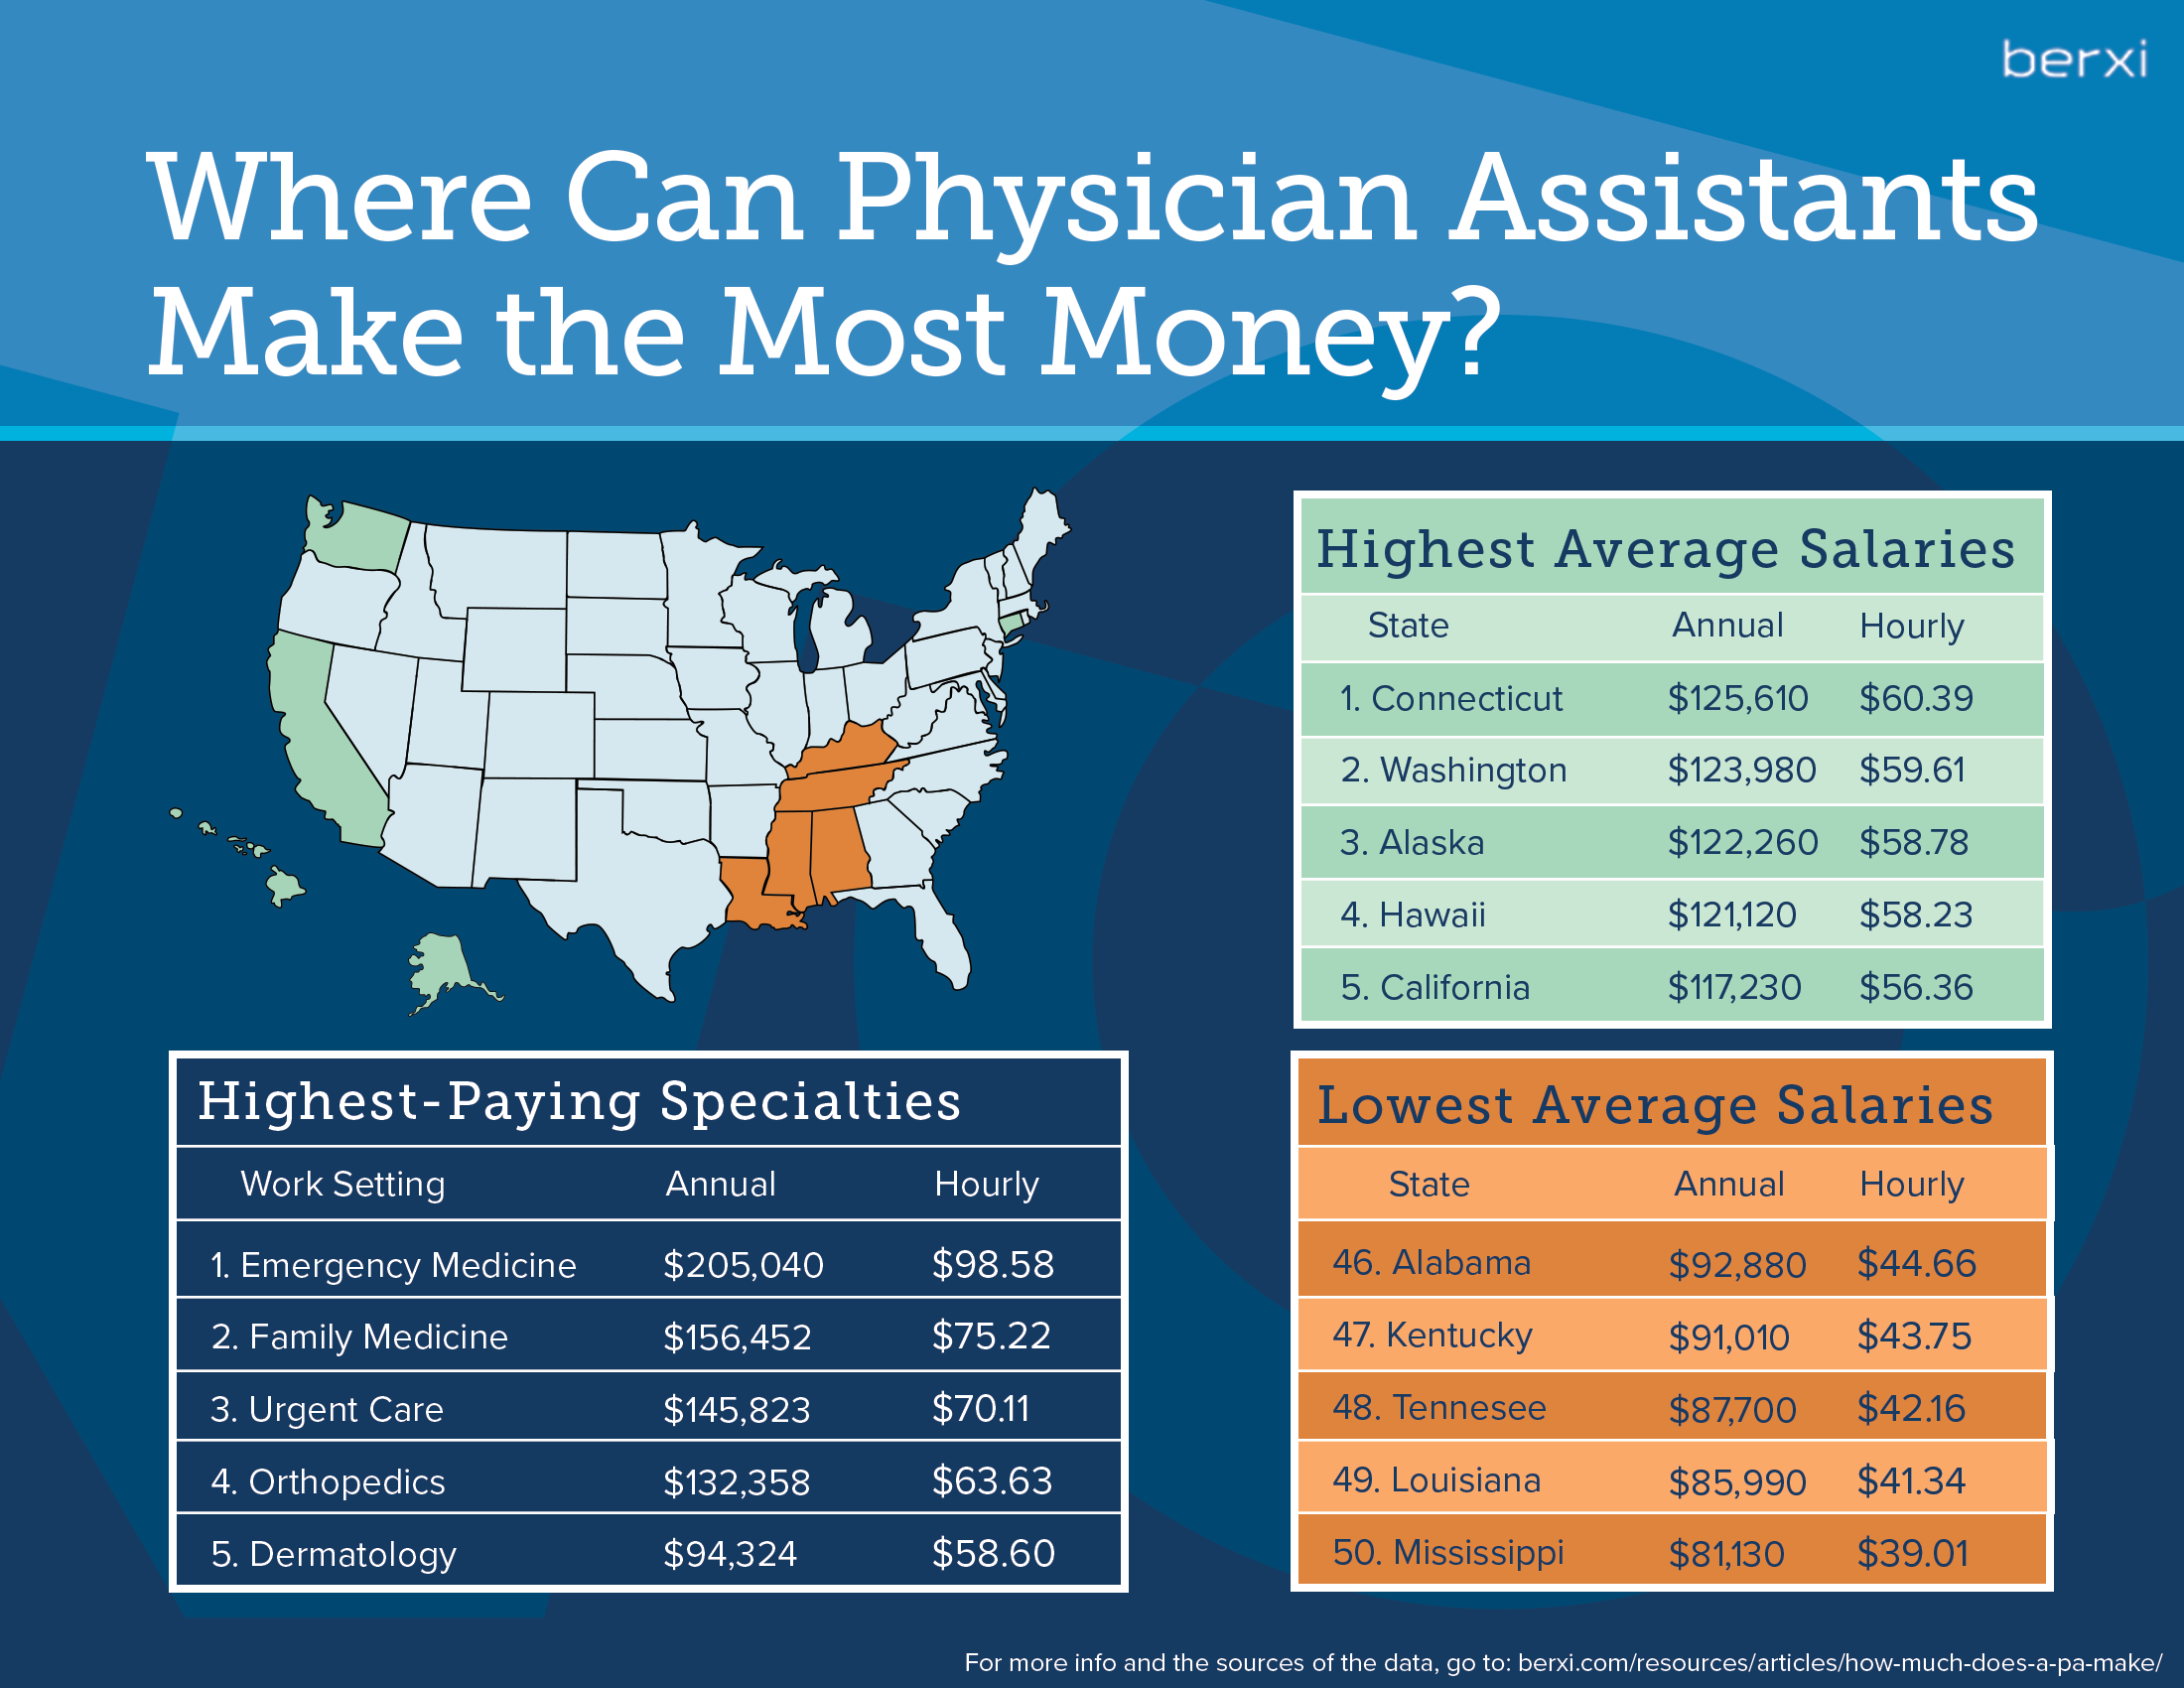 Where Physician Assistants Can Make the Most Money infographic